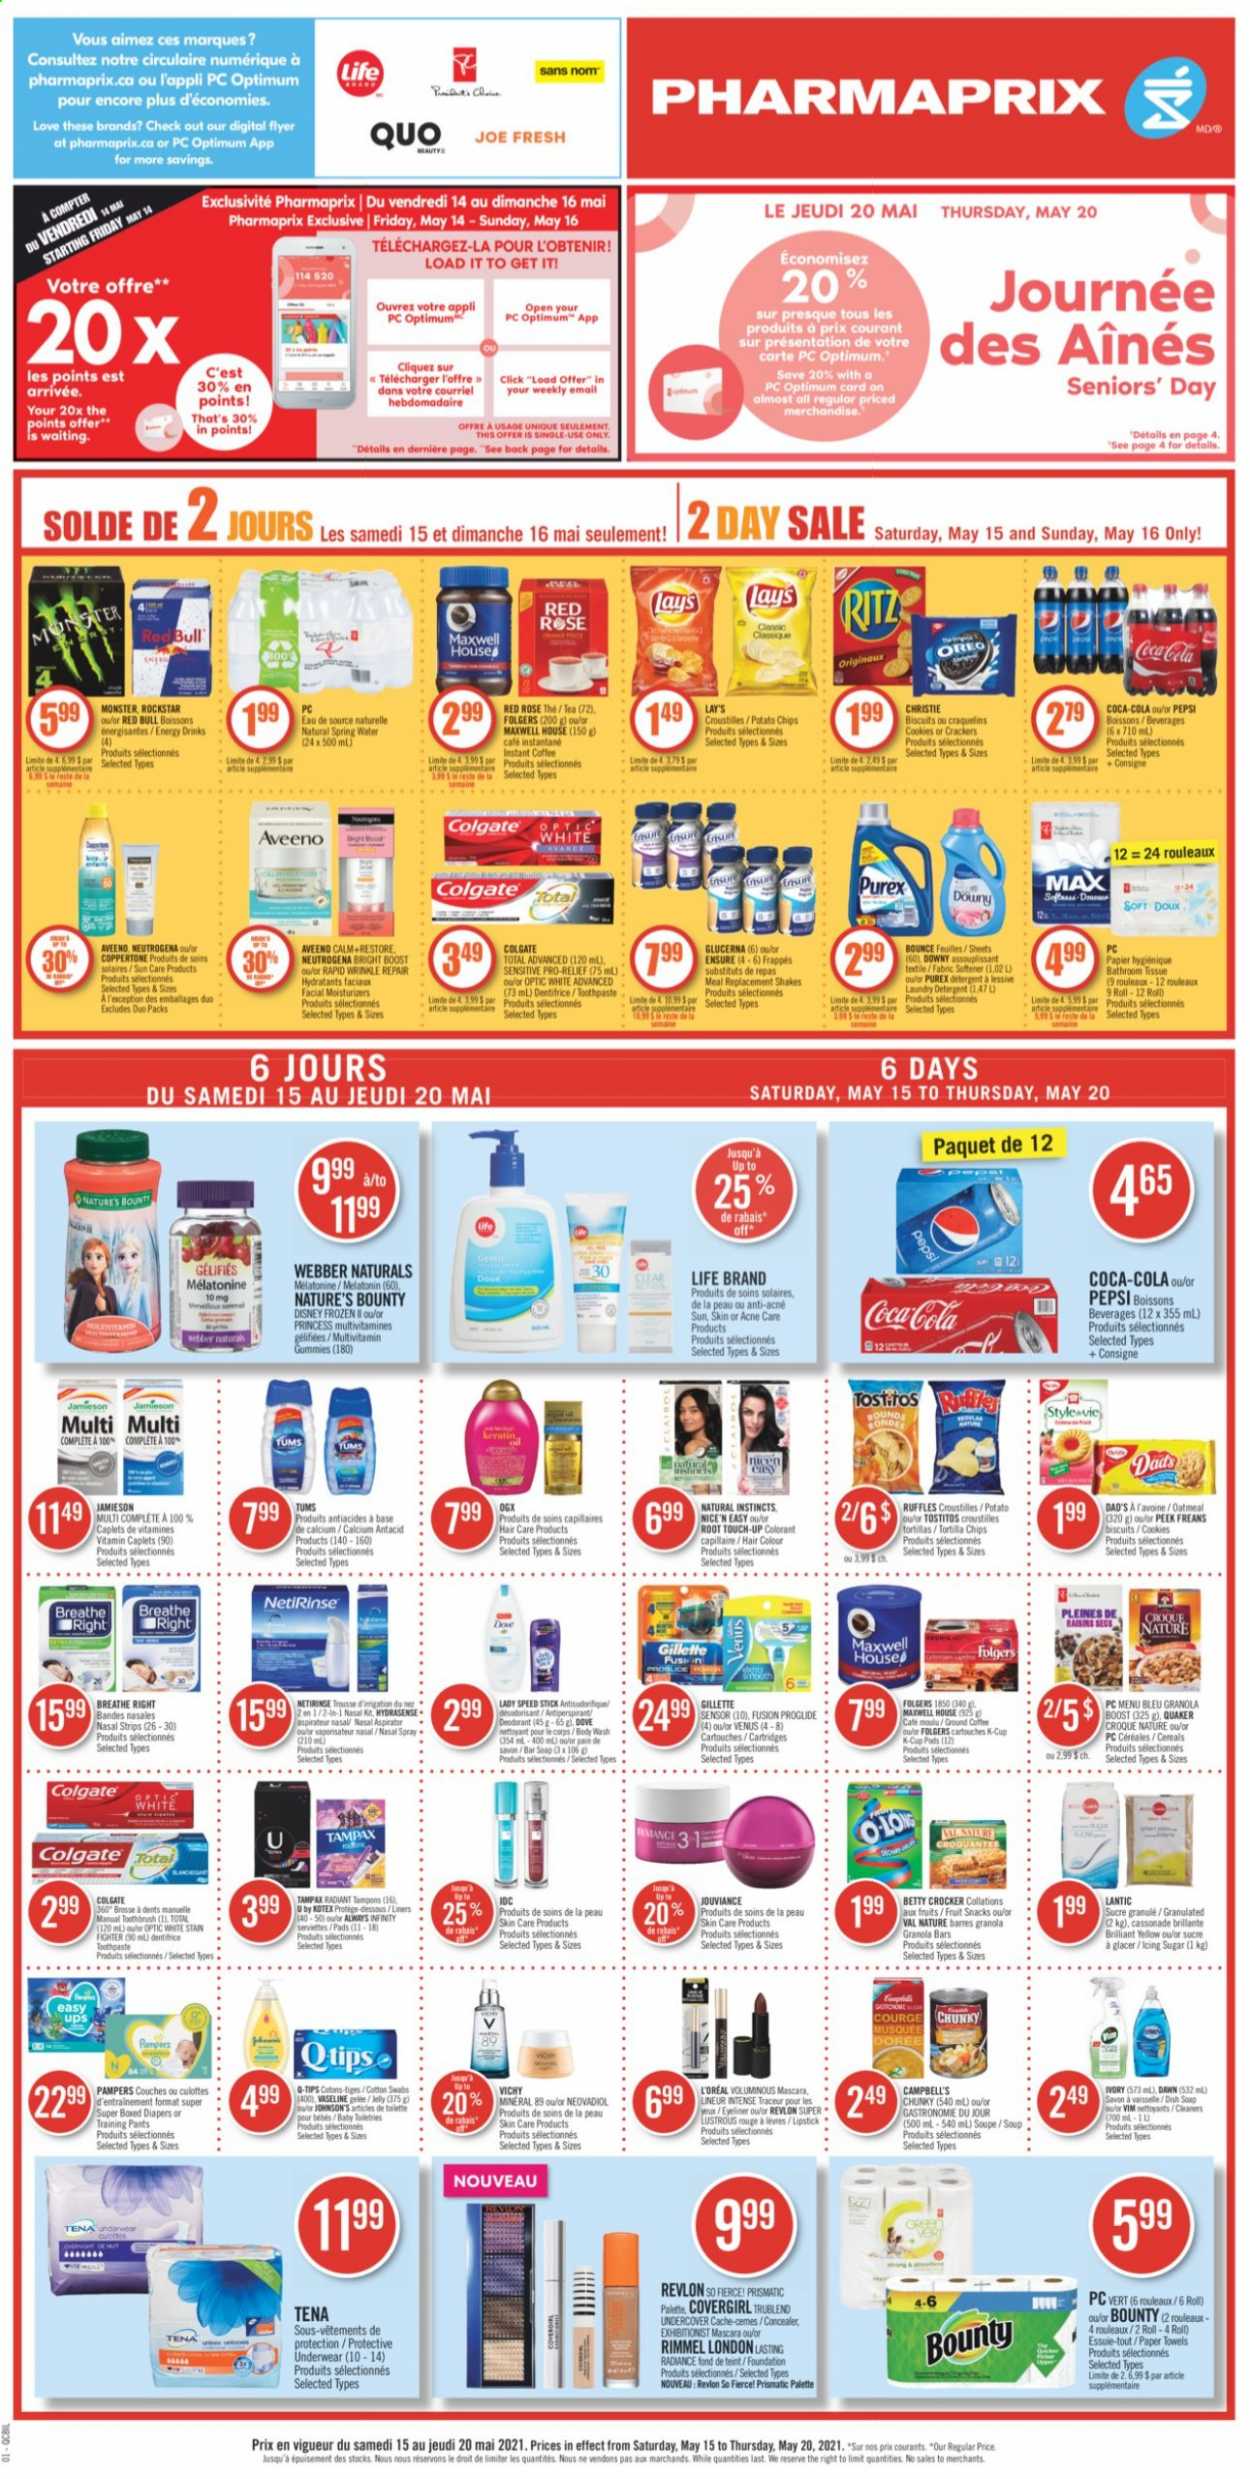 thumbnail - Pharmaprix Flyer - May 15, 2021 - May 20, 2021 - Sales products - Campbell's, soup, Quaker, Disney, shake, cookies, crackers, biscuit, fruit snack, RITZ, tortilla chips, potato chips, Lay’s, Ruffles, Tostitos, sugar, oatmeal, icing sugar, cereals, granola bar, dried fruit, Coca-Cola, Pepsi, energy drink, Monster, Red Bull, Rockstar, spring water, Boost, Maxwell House, tea, instant coffee, Folgers, coffee capsules, K-Cups, rosé wine, pants, nappies, Johnson's, baby pants, Aveeno, tissues, kitchen towels, paper towels, fabric softener, laundry detergent, Bounce, Purex, body wash, Vichy, Vaseline, soap bar, soap, toothpaste, Kotex, tampons, Always Infinity, L’Oréal, moisturizer, OGX, Root Touch-Up, Revlon, hair color, keratin, anti-perspirant, Speed Stick, Venus, corrector, lipstick, Rimmel, eyeliner, princess, rose, Melatonin, multivitamin, Nature's Bounty, Glucerna, Antacid, nasal spray, Oreo, Gillette, mascara, Neutrogena, raisins, Tampax, Palette, Pampers. Page 1.